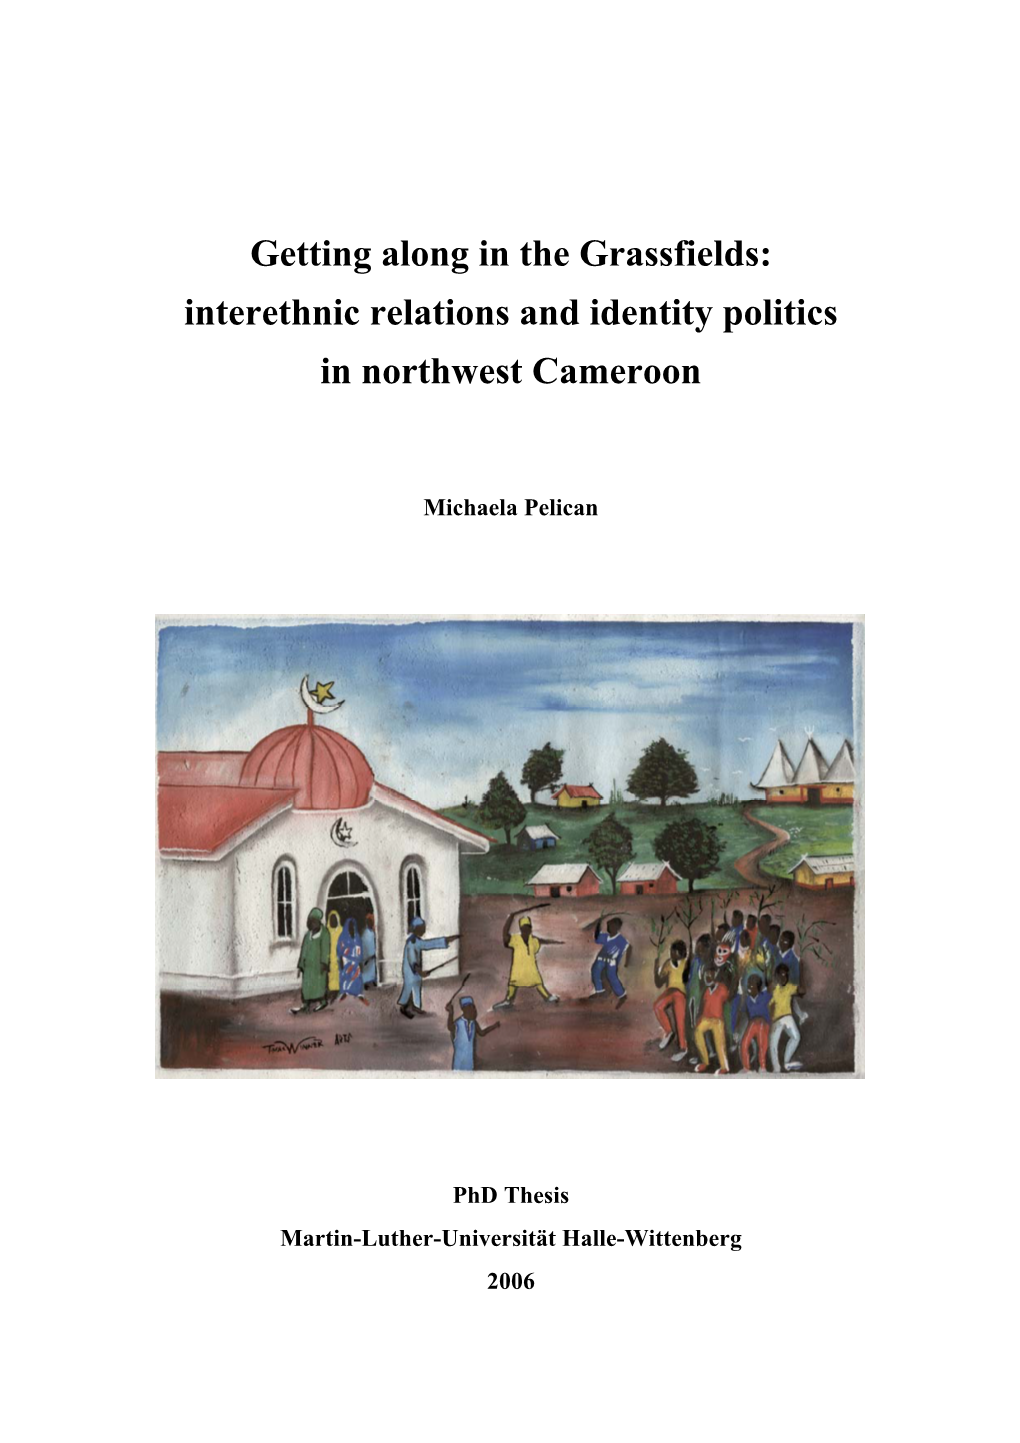 Getting Along in the Grassfields: Interethnic Relations and Identity Politics in Northwest Cameroon